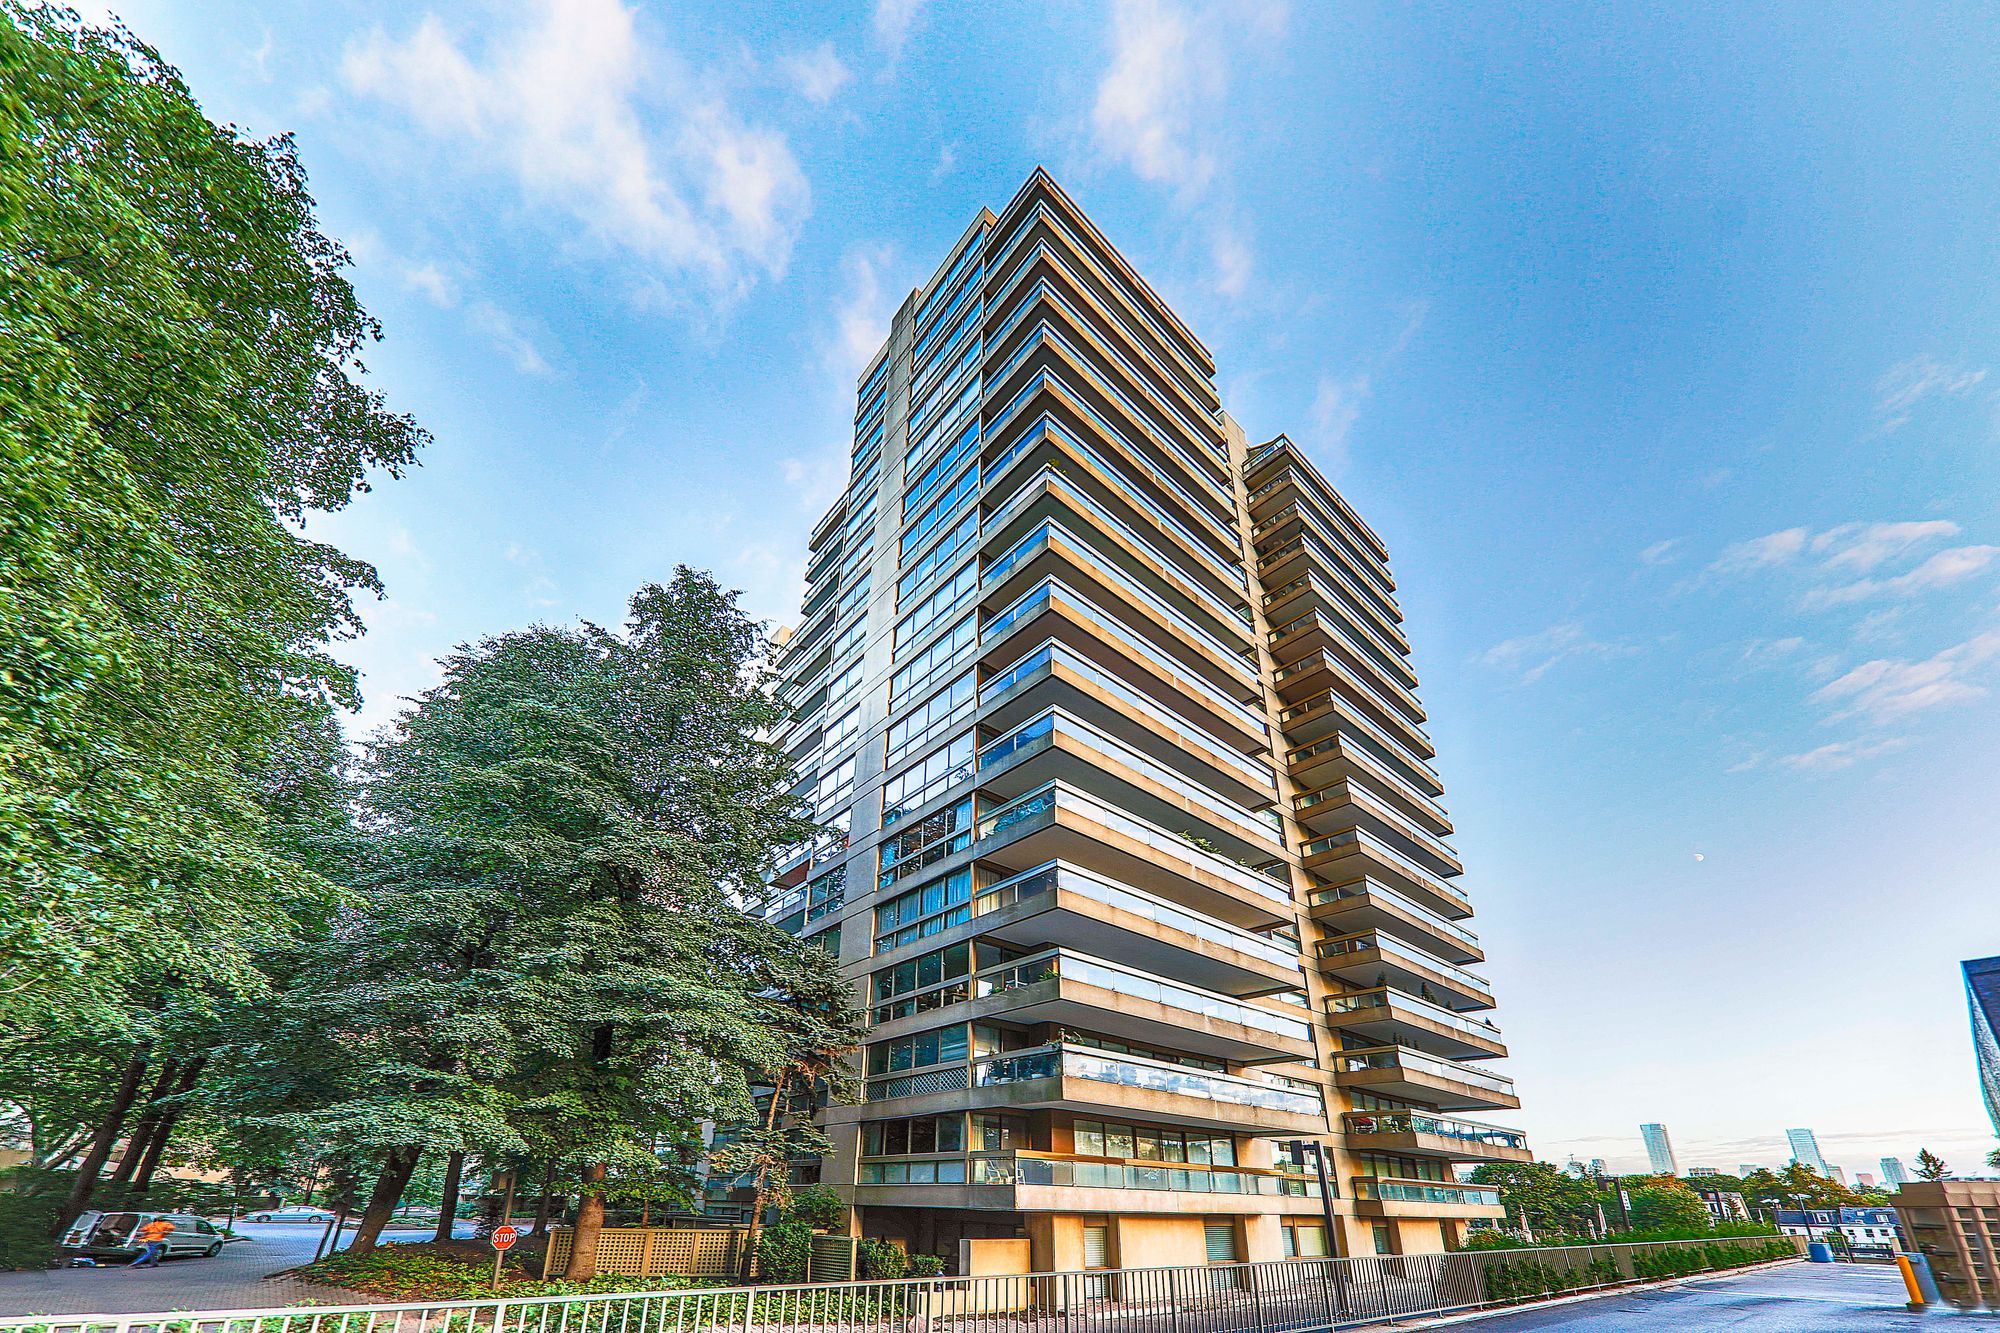 61 St Clair Ave W. This condo at Granite Place is located in  Midtown, Toronto - image #1 of 5 by Strata.ca